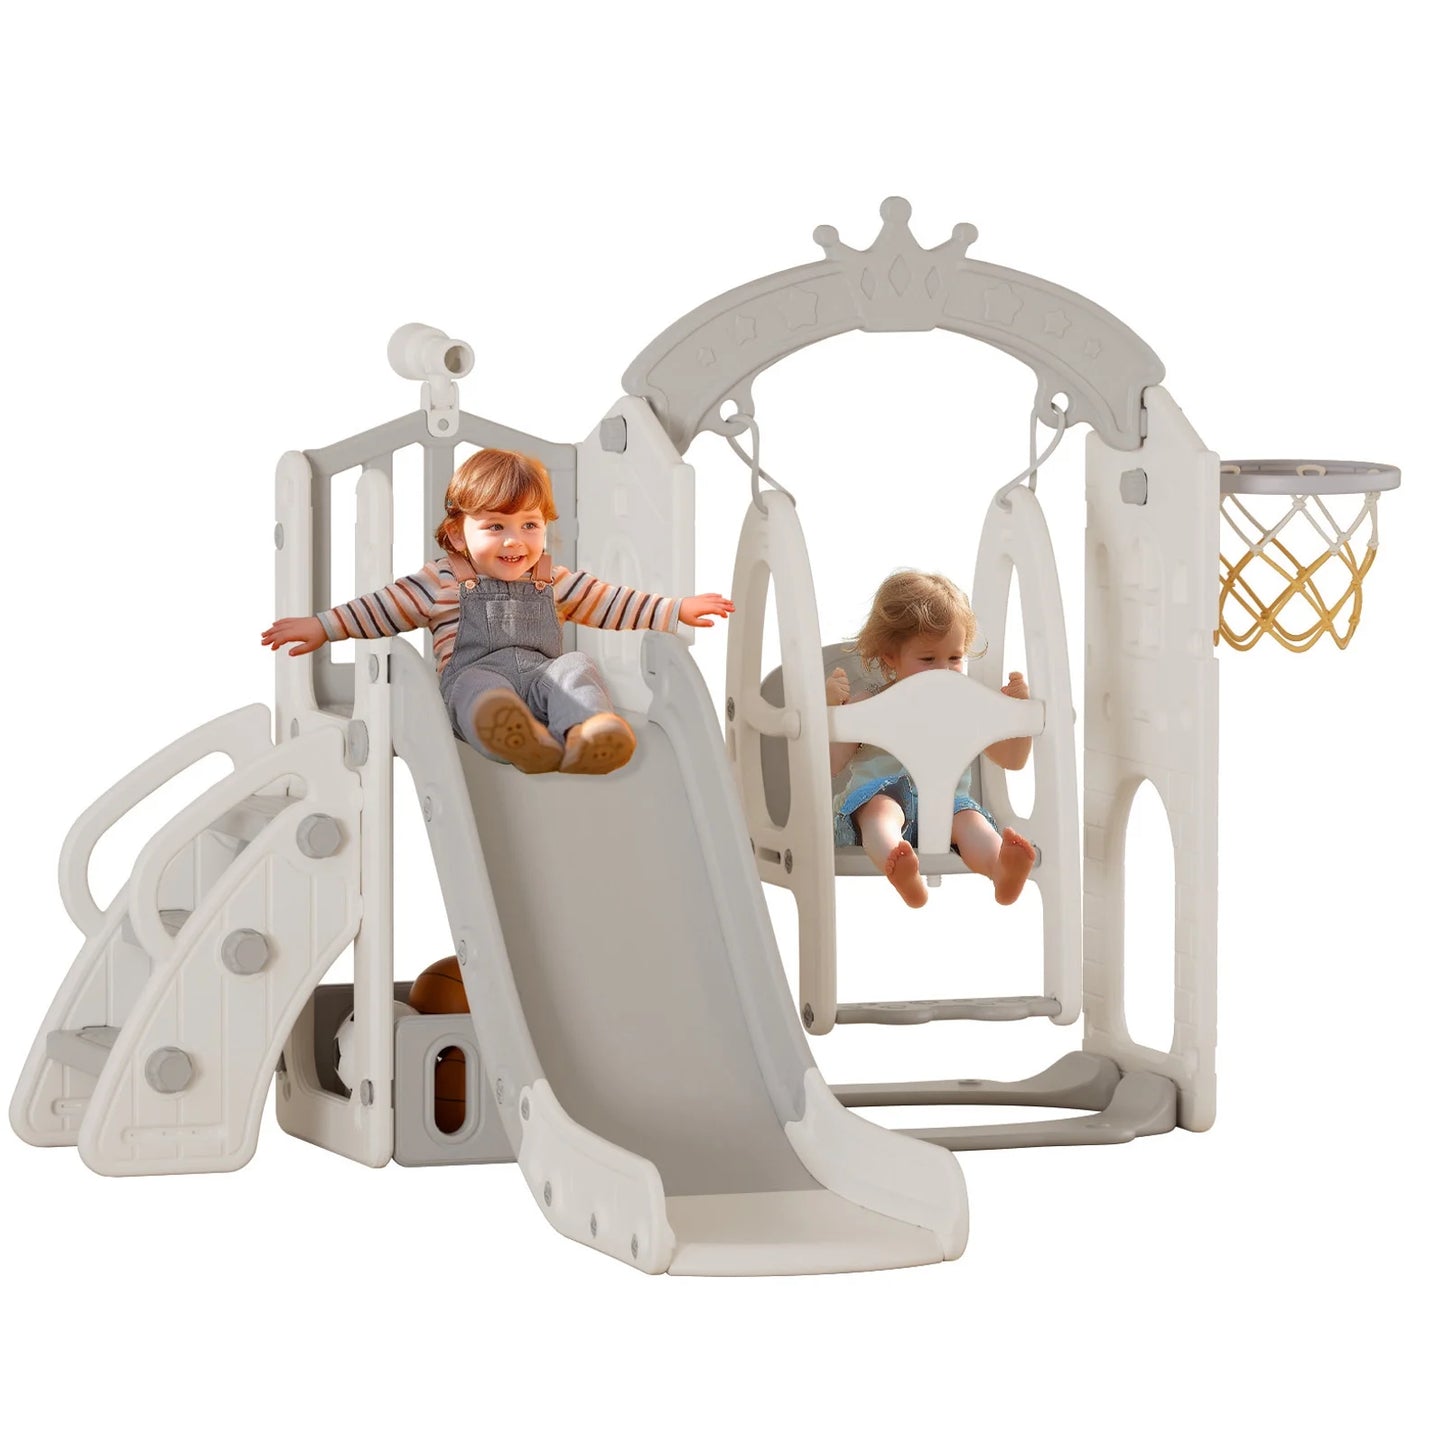 4 in 1 Toddler Slide and Swing Set, Kids Large Climber Slide Playset with Basketball Hoop Playground Swing Set for Indoor Outdoor Backyard 1-6 Gifts